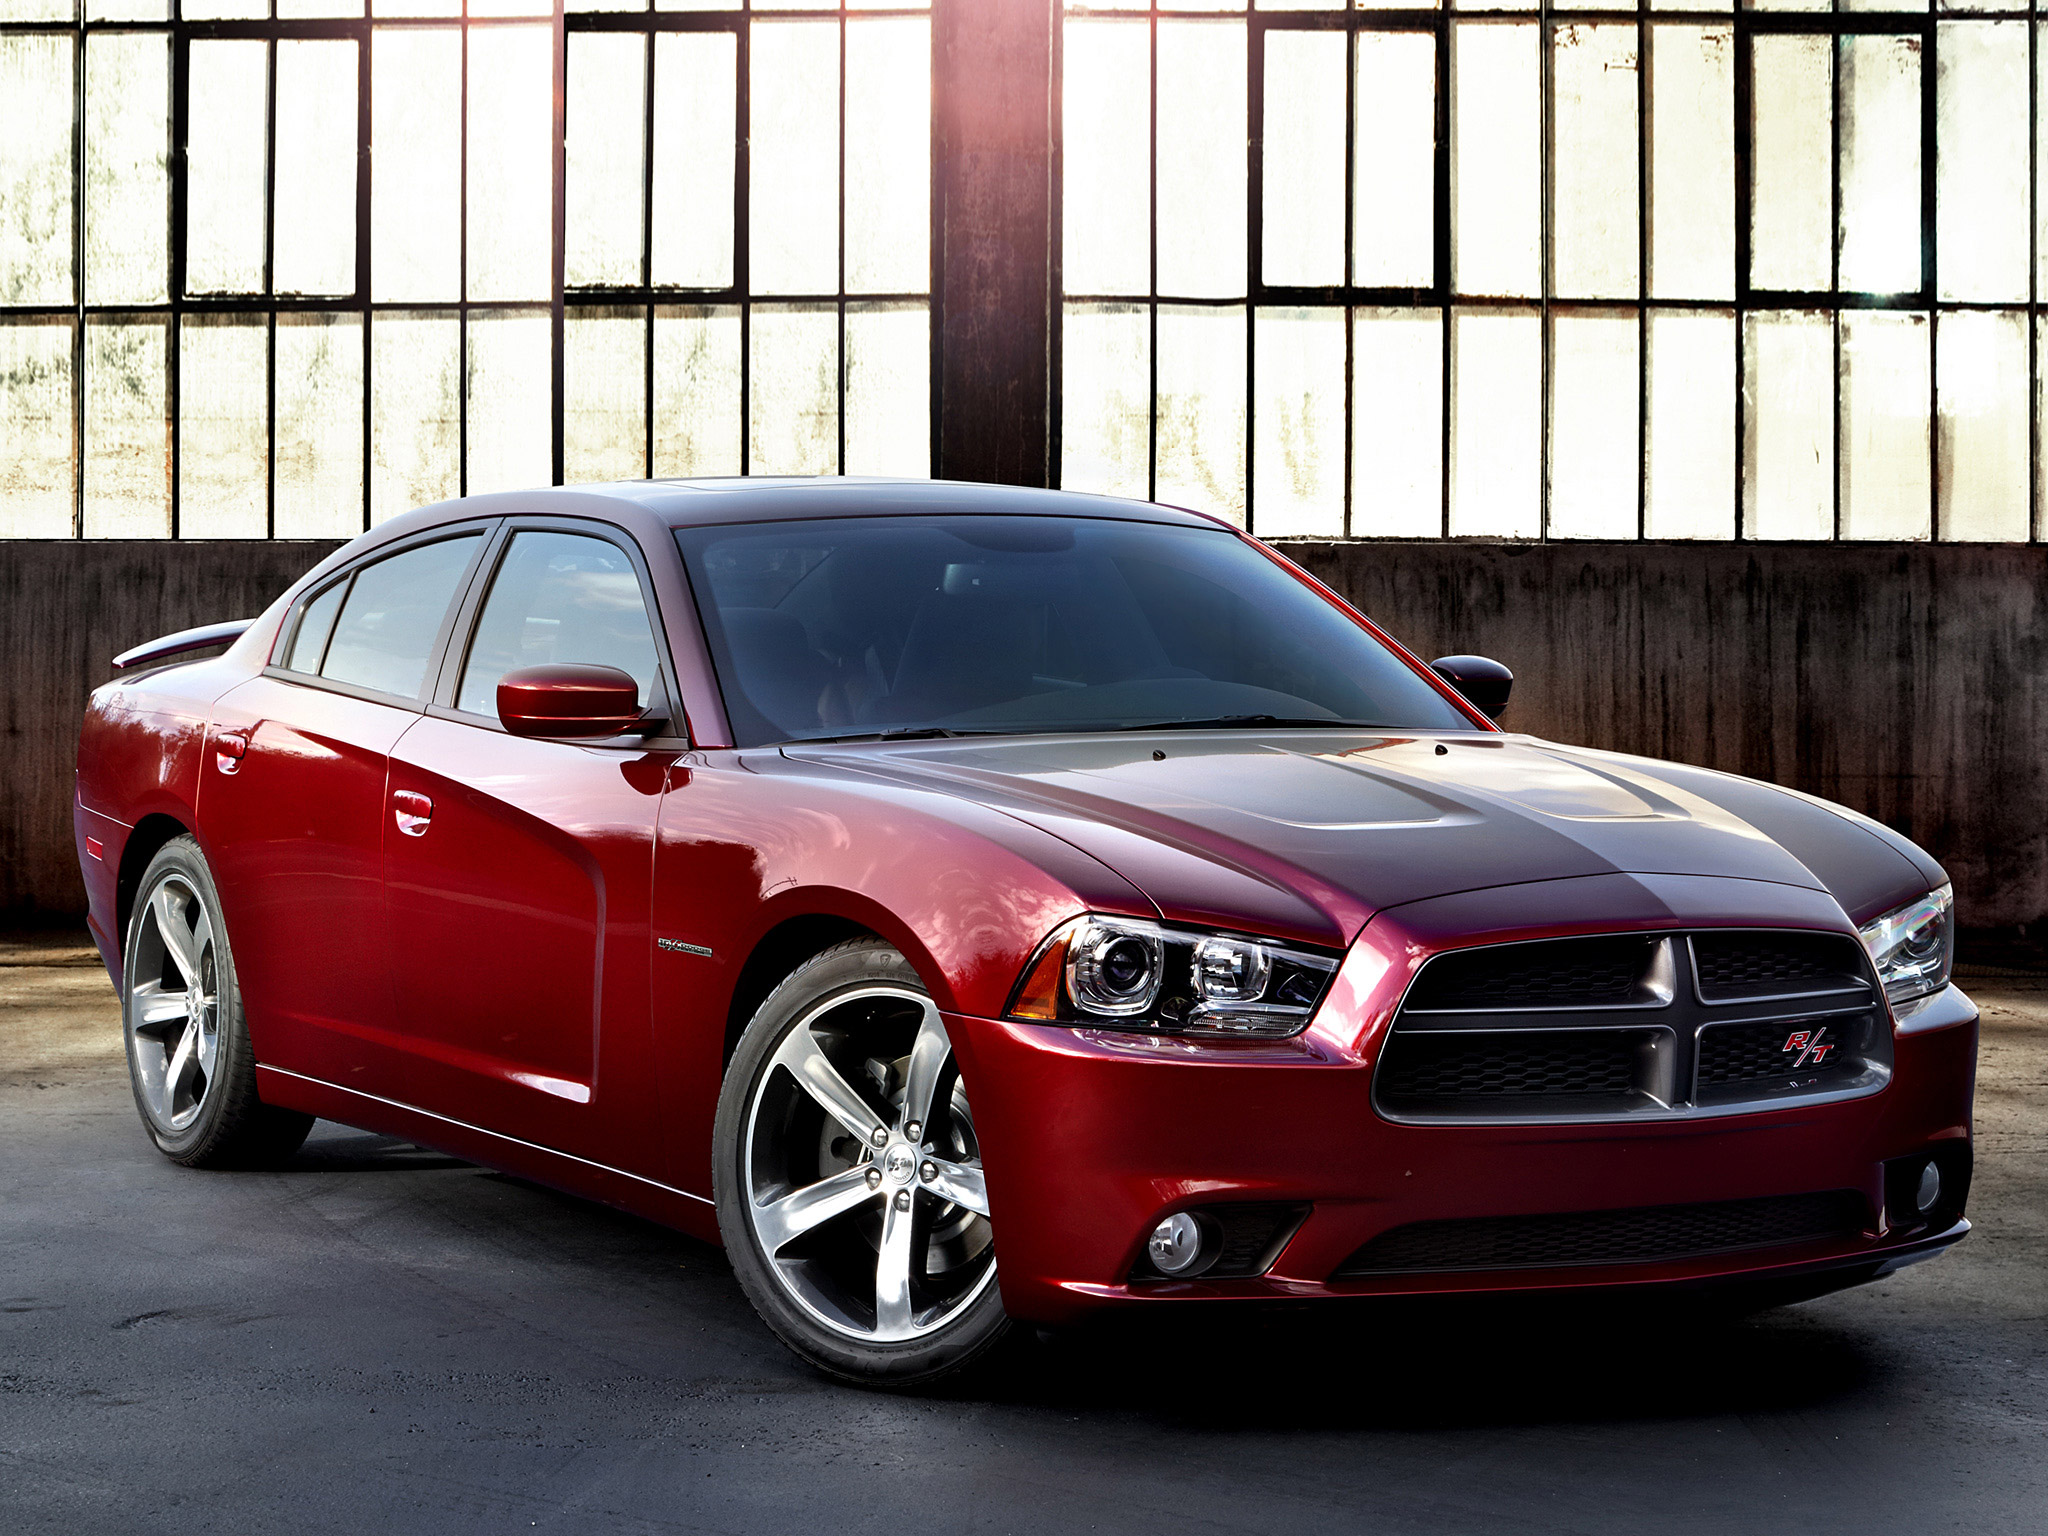  2014 Dodge Charger R/T 100th Anniversary Wallpaper.